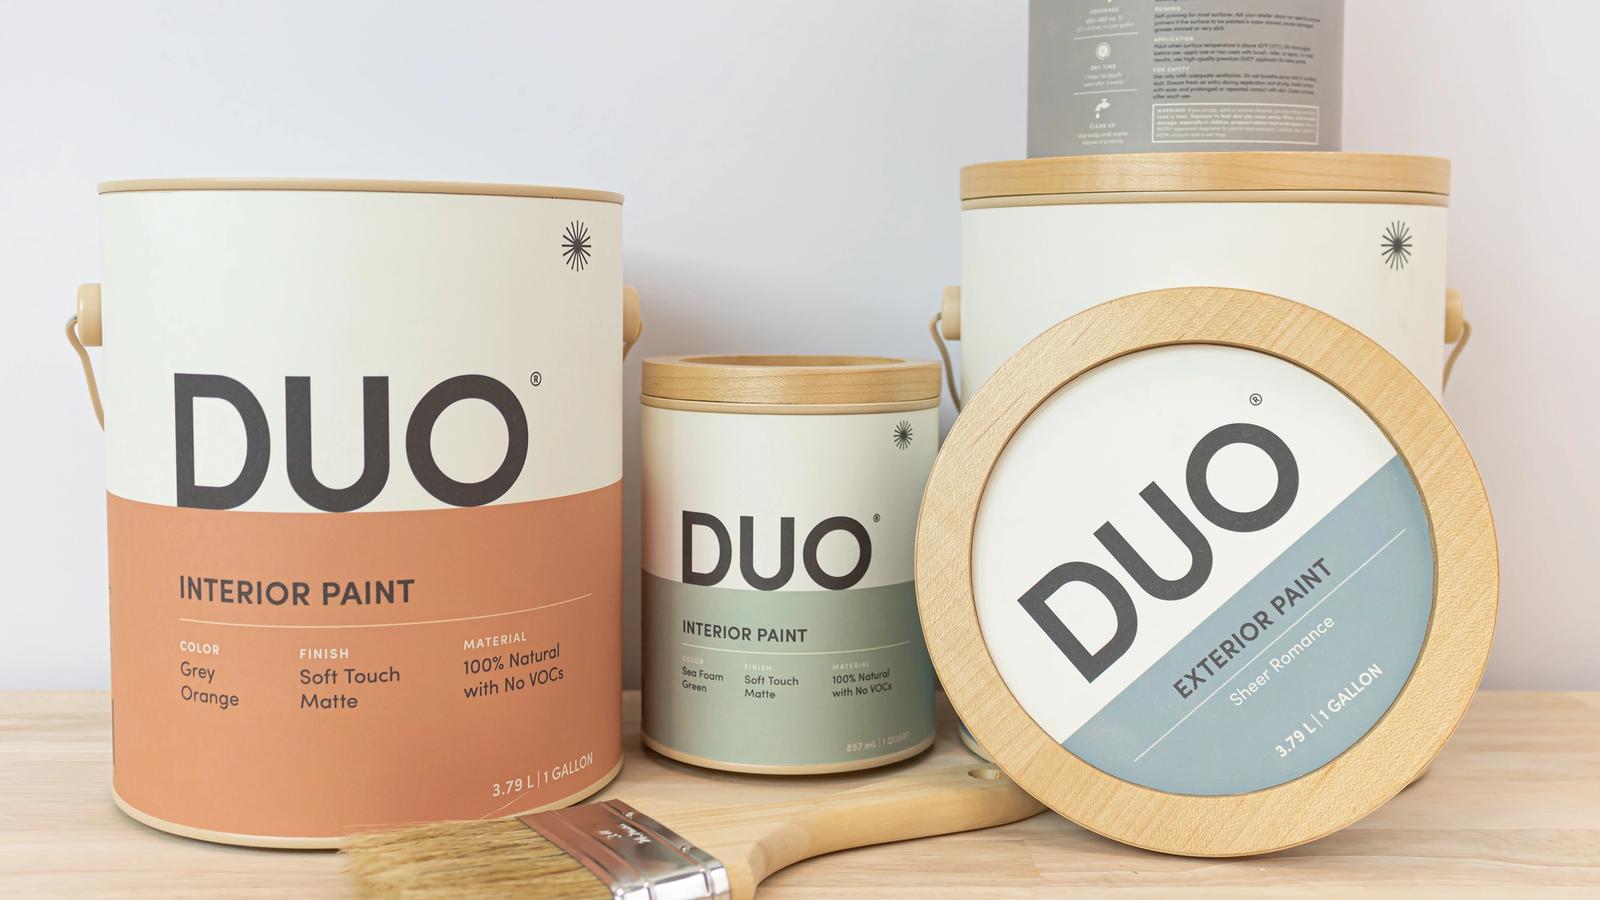 Duo // Artist Collection paint packaging